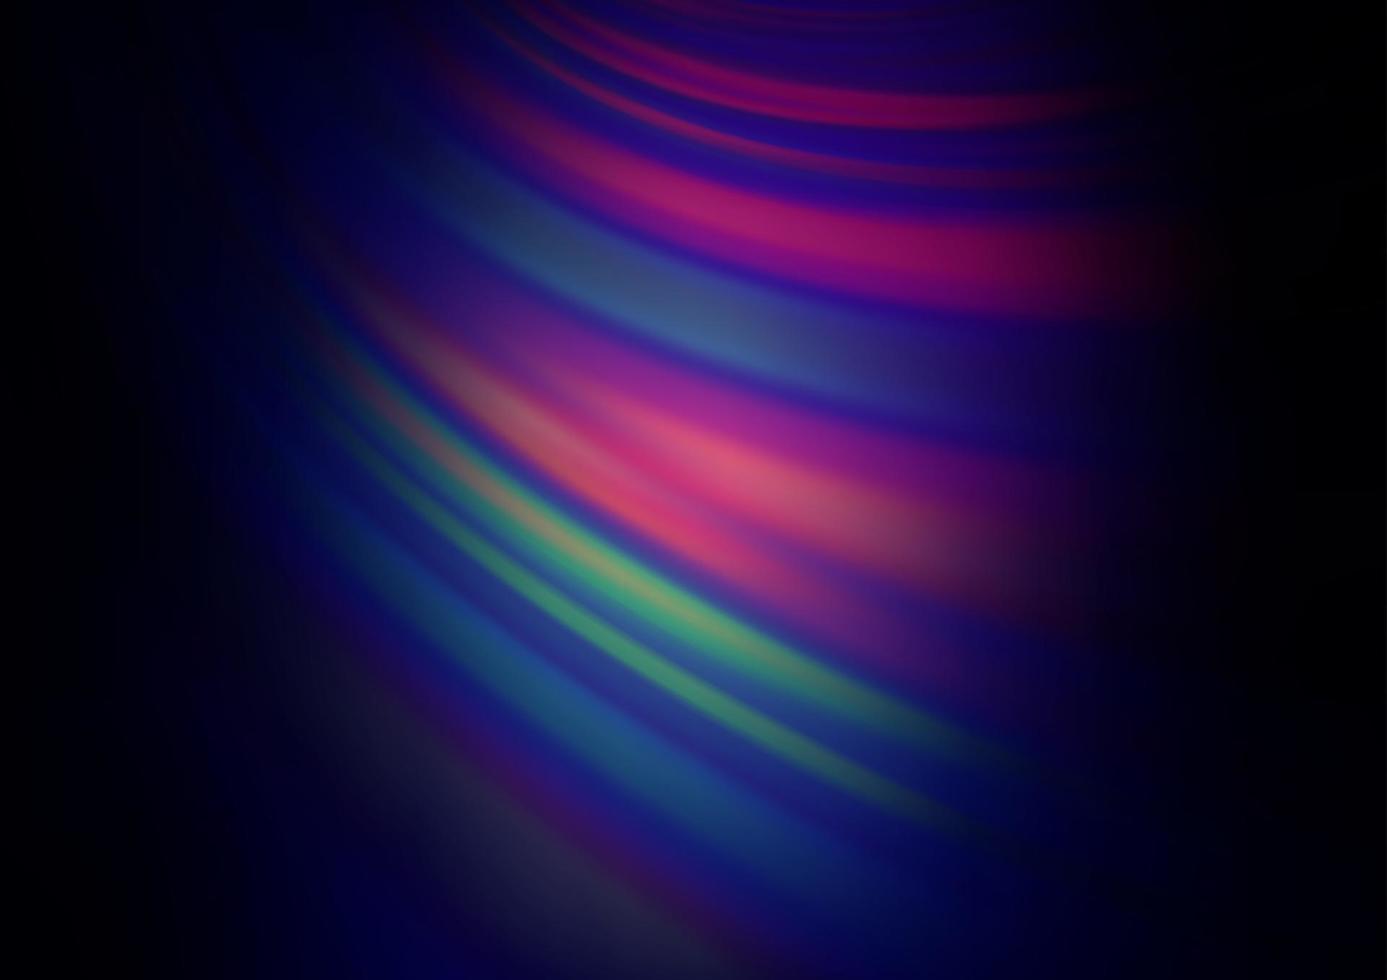 Dark Pink, Blue vector glossy abstract background.